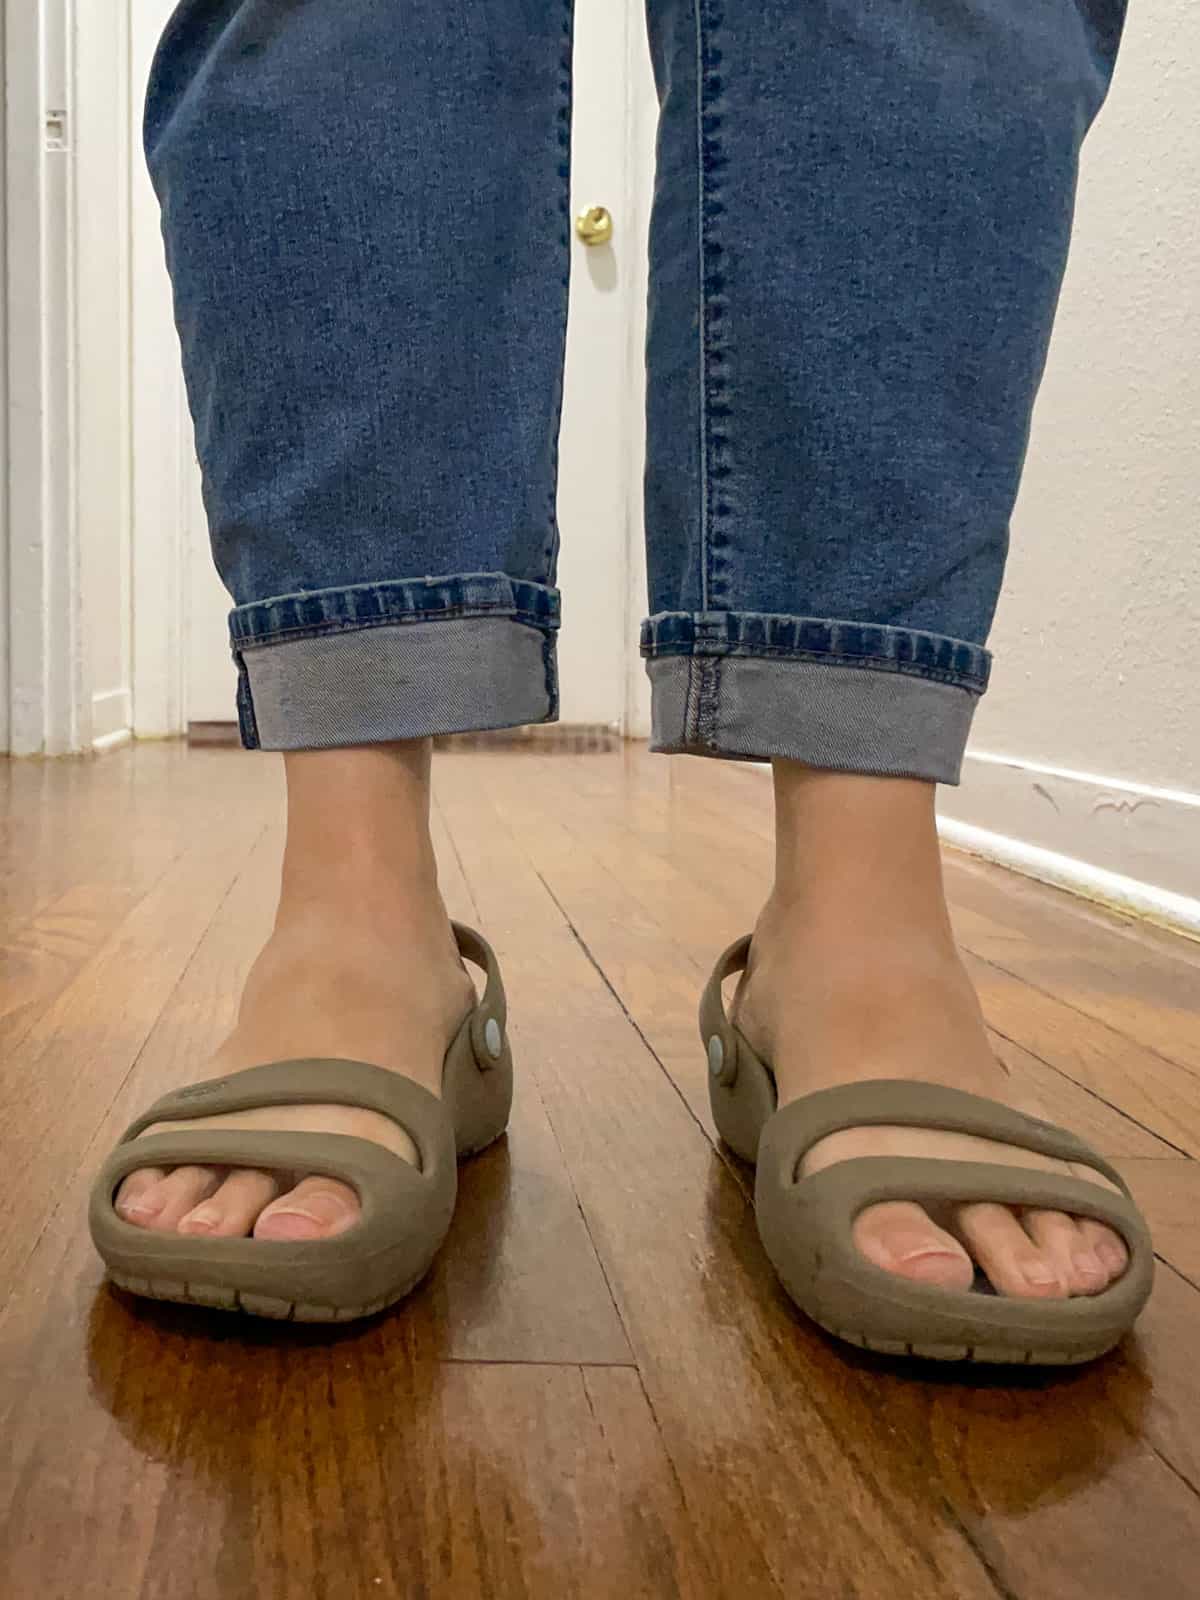 woman wearing jeans and Crocs sandals standing on a wooden floor inside